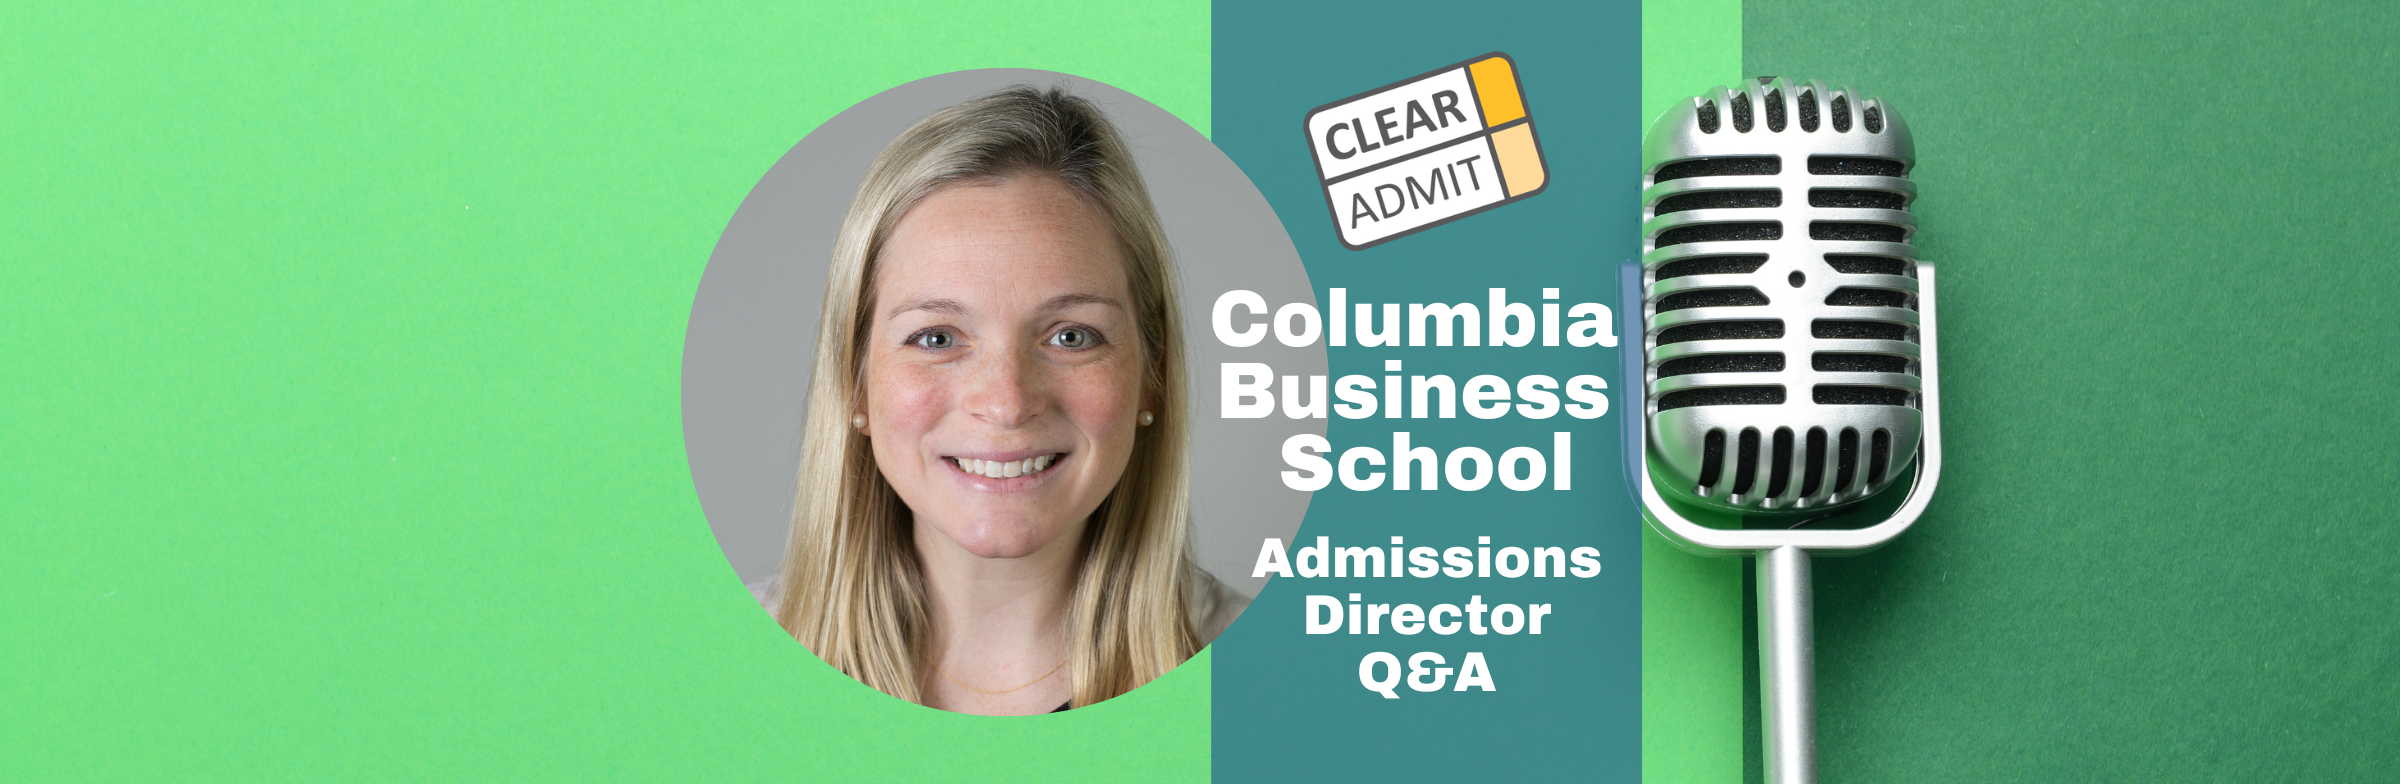 Image for Admissions Director Q&A: Morgan Janela of Columbia Business School